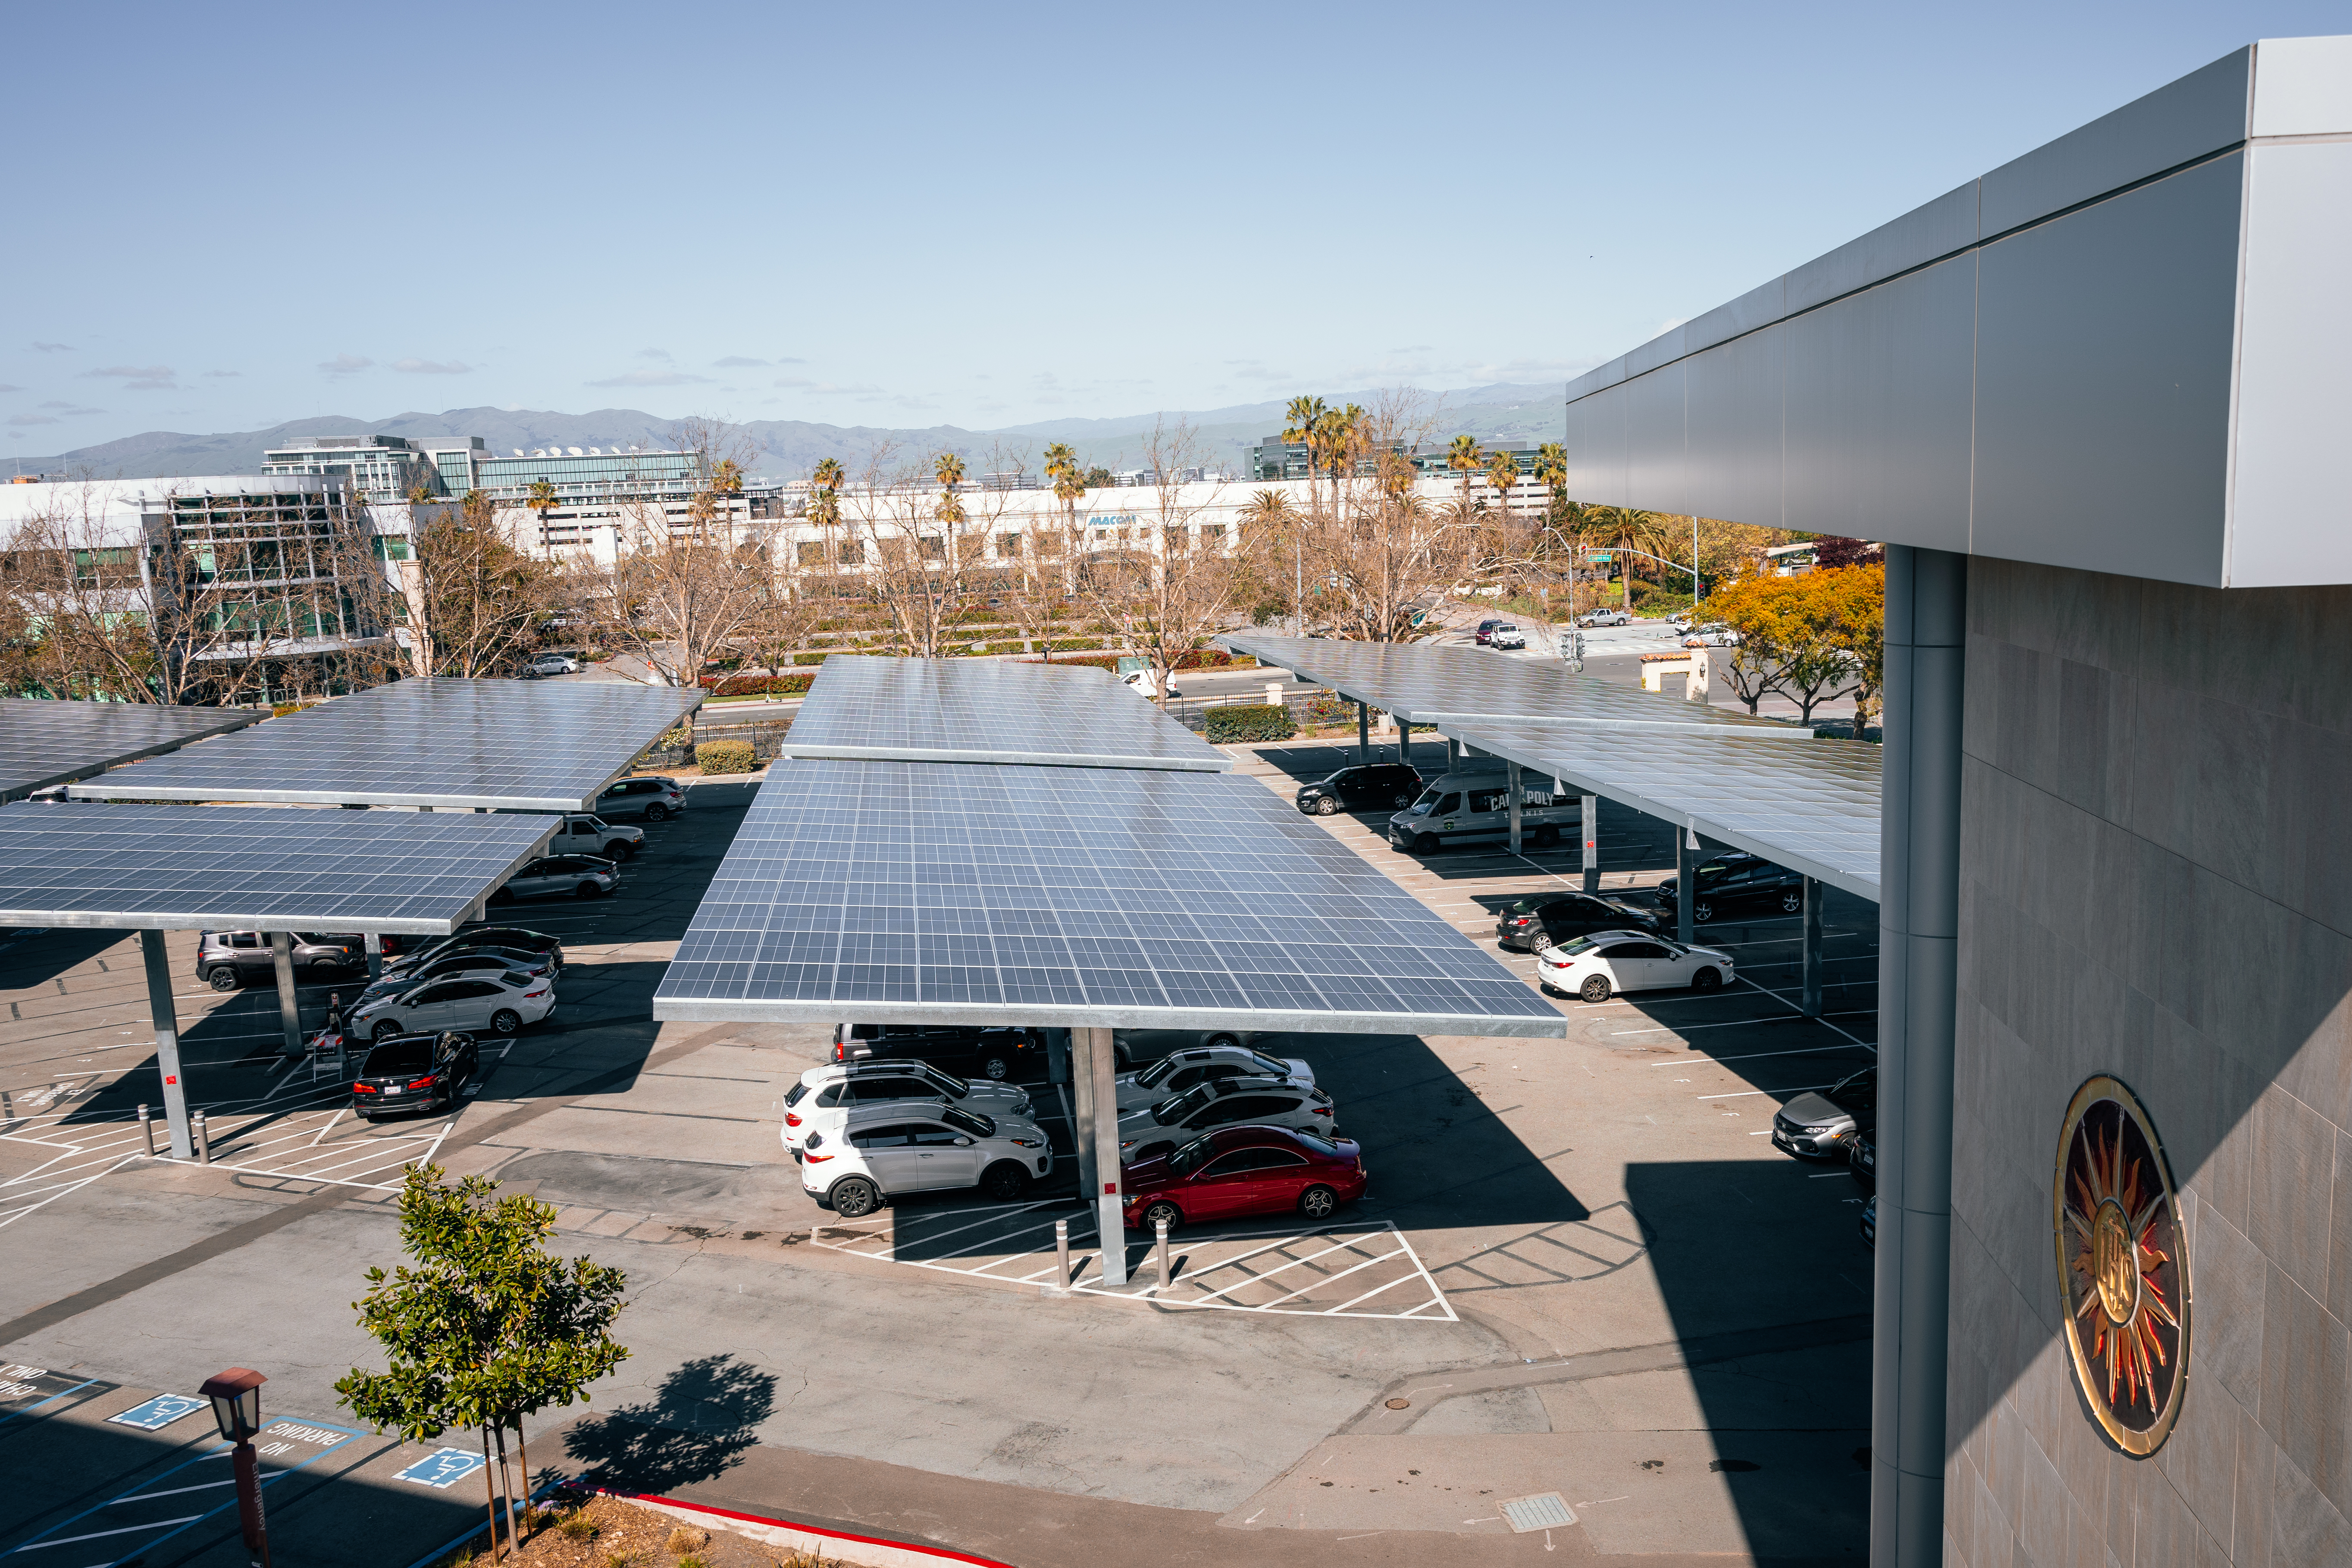 Photos of solar panels in leavey lot 